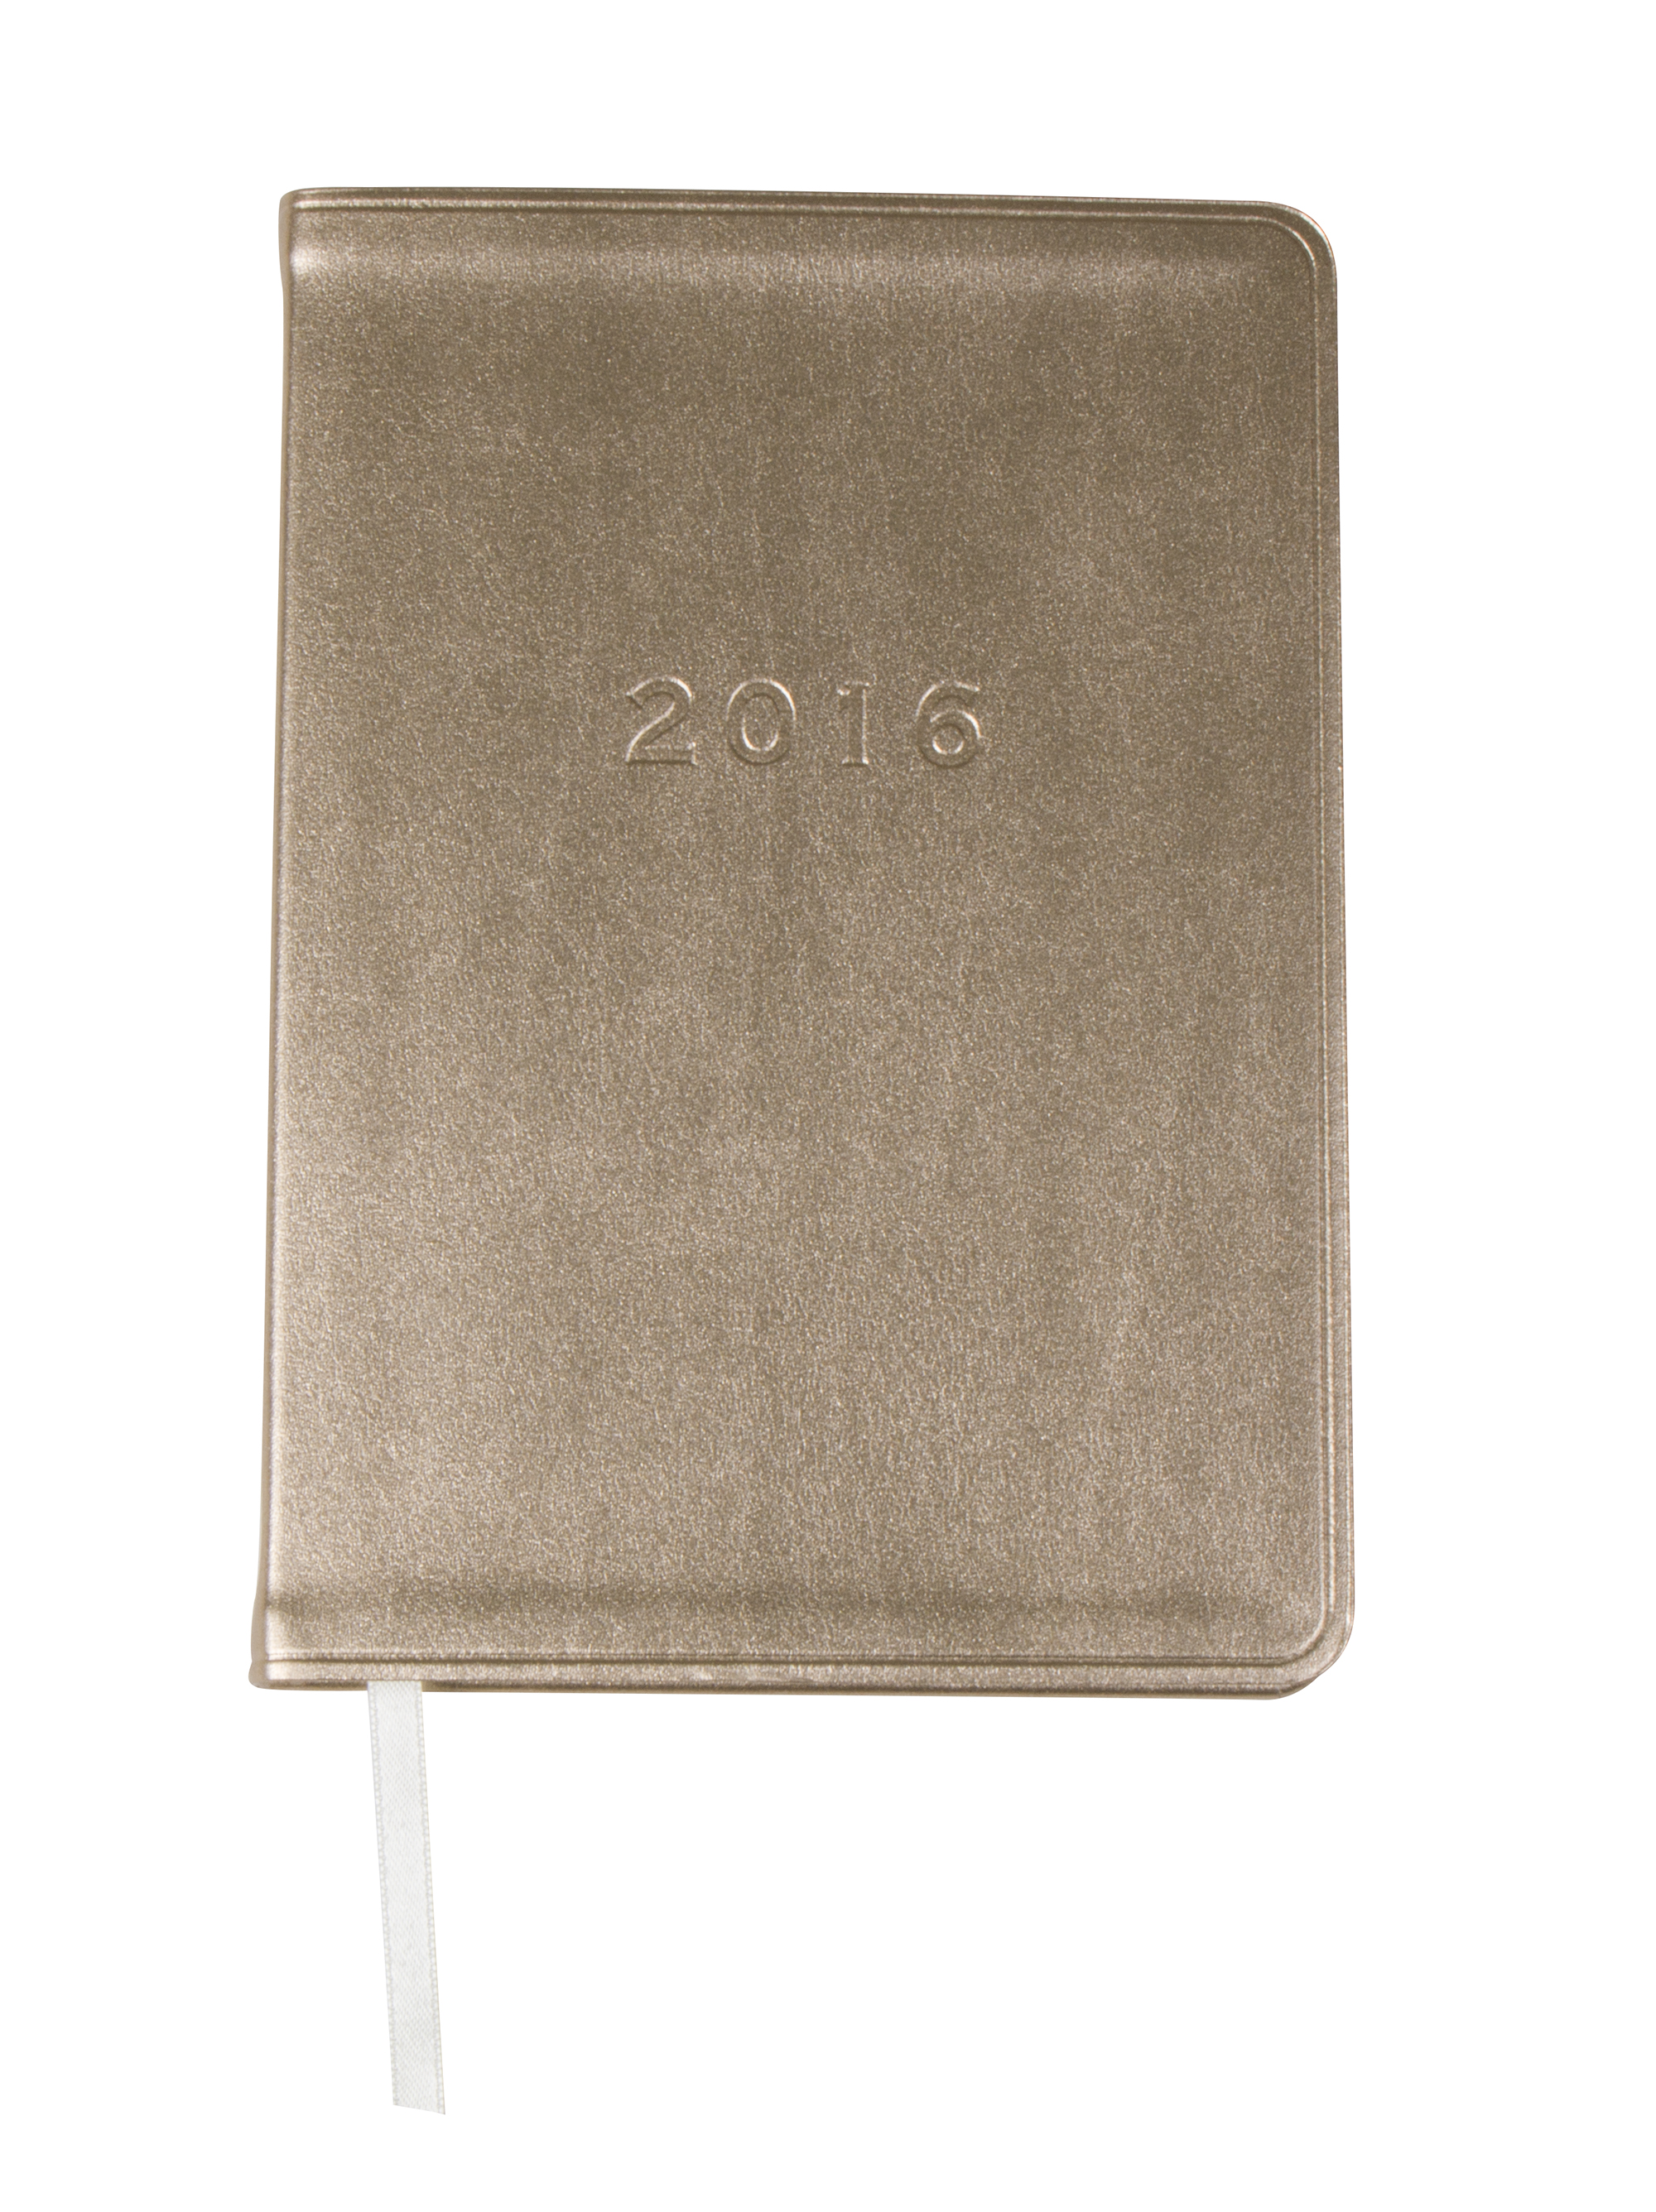 Gallery Leather ”Metallic Weekly Planner” in ”Metallic Gold,” $15 at Barnes &amp; Noble Towne Centre